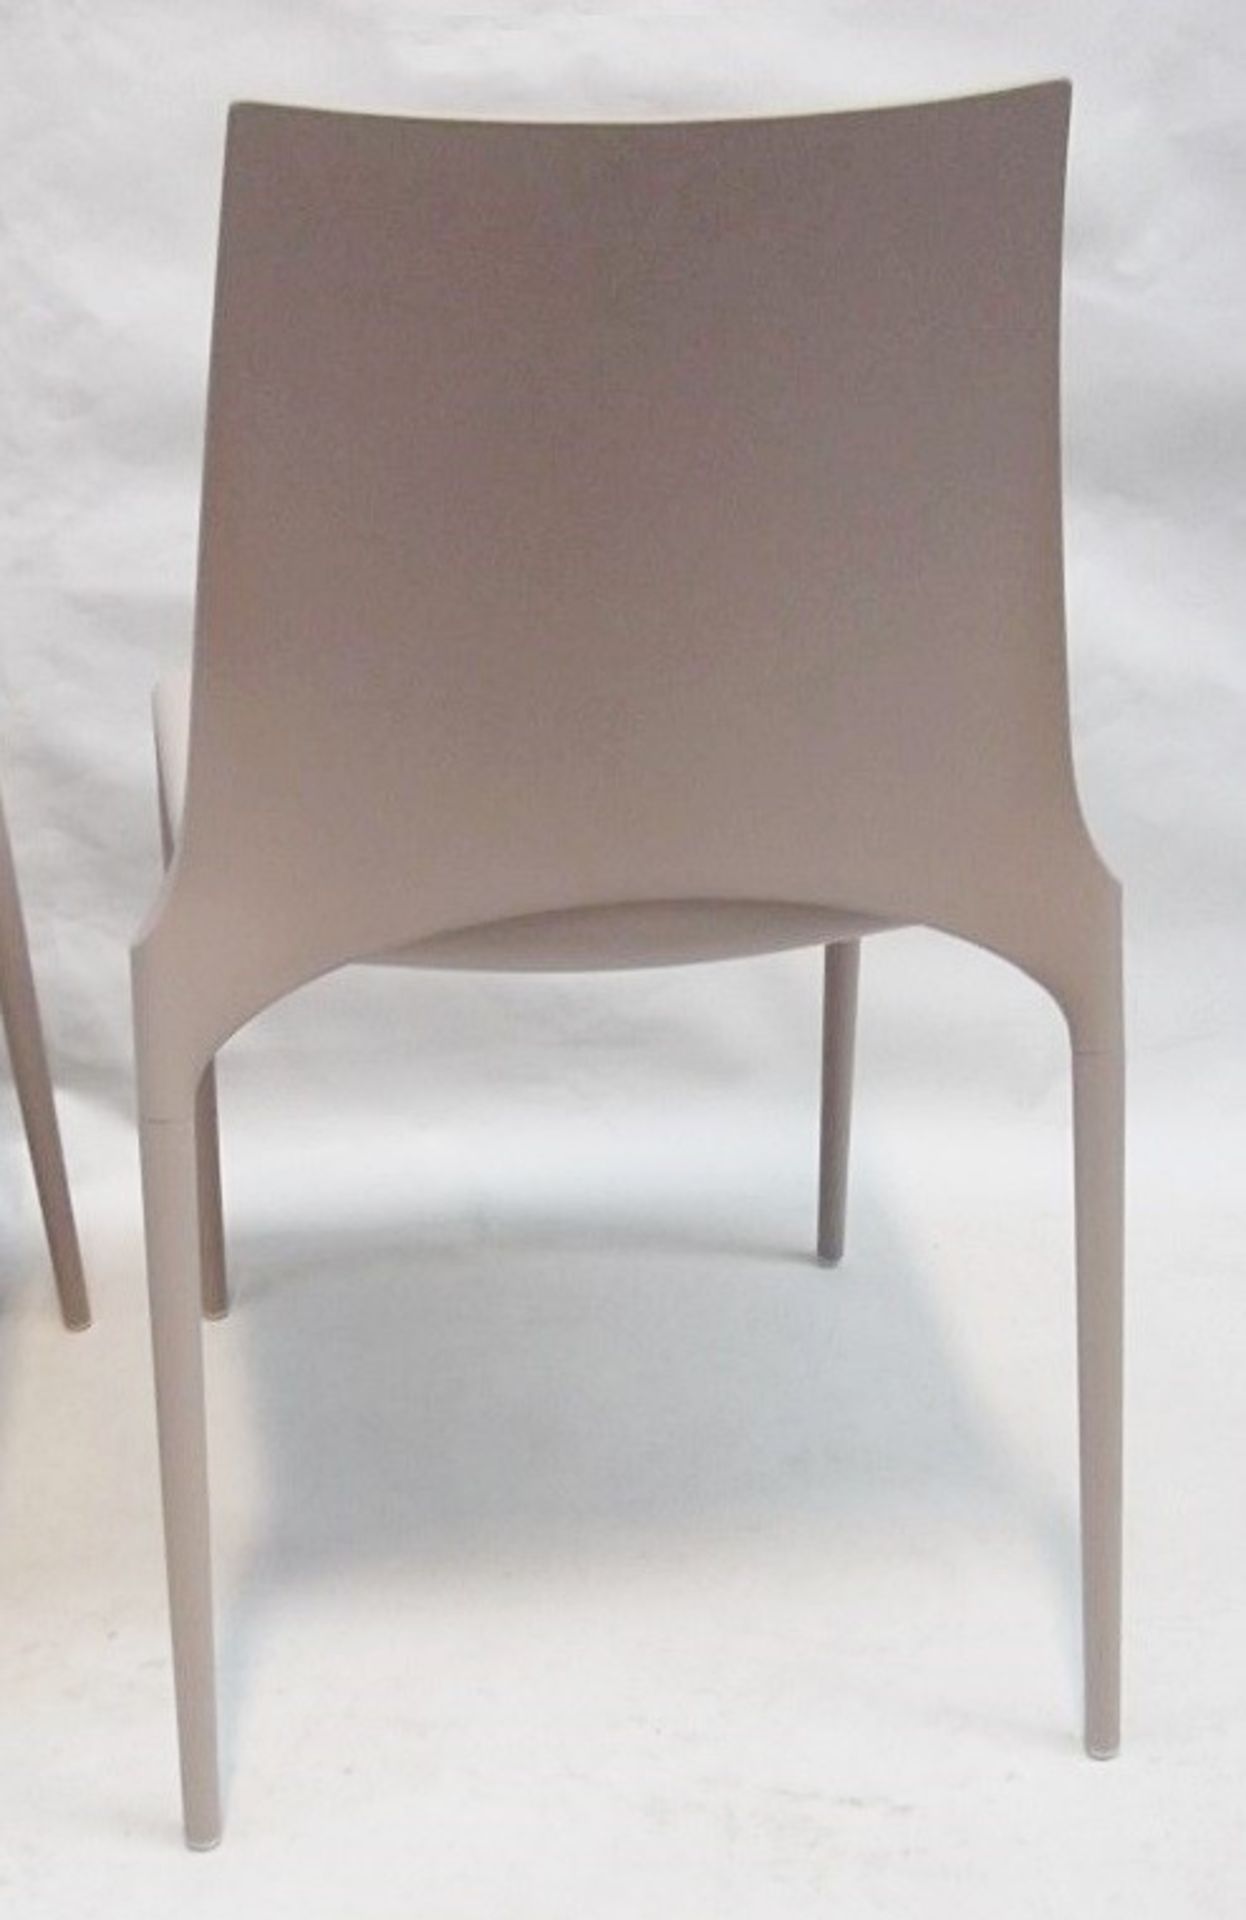 Set Of 2 x LIGNE ROSET "Petra Dining" Chairs In Beige - Ref: 3597798 - CL087 - Location: - Image 2 of 5